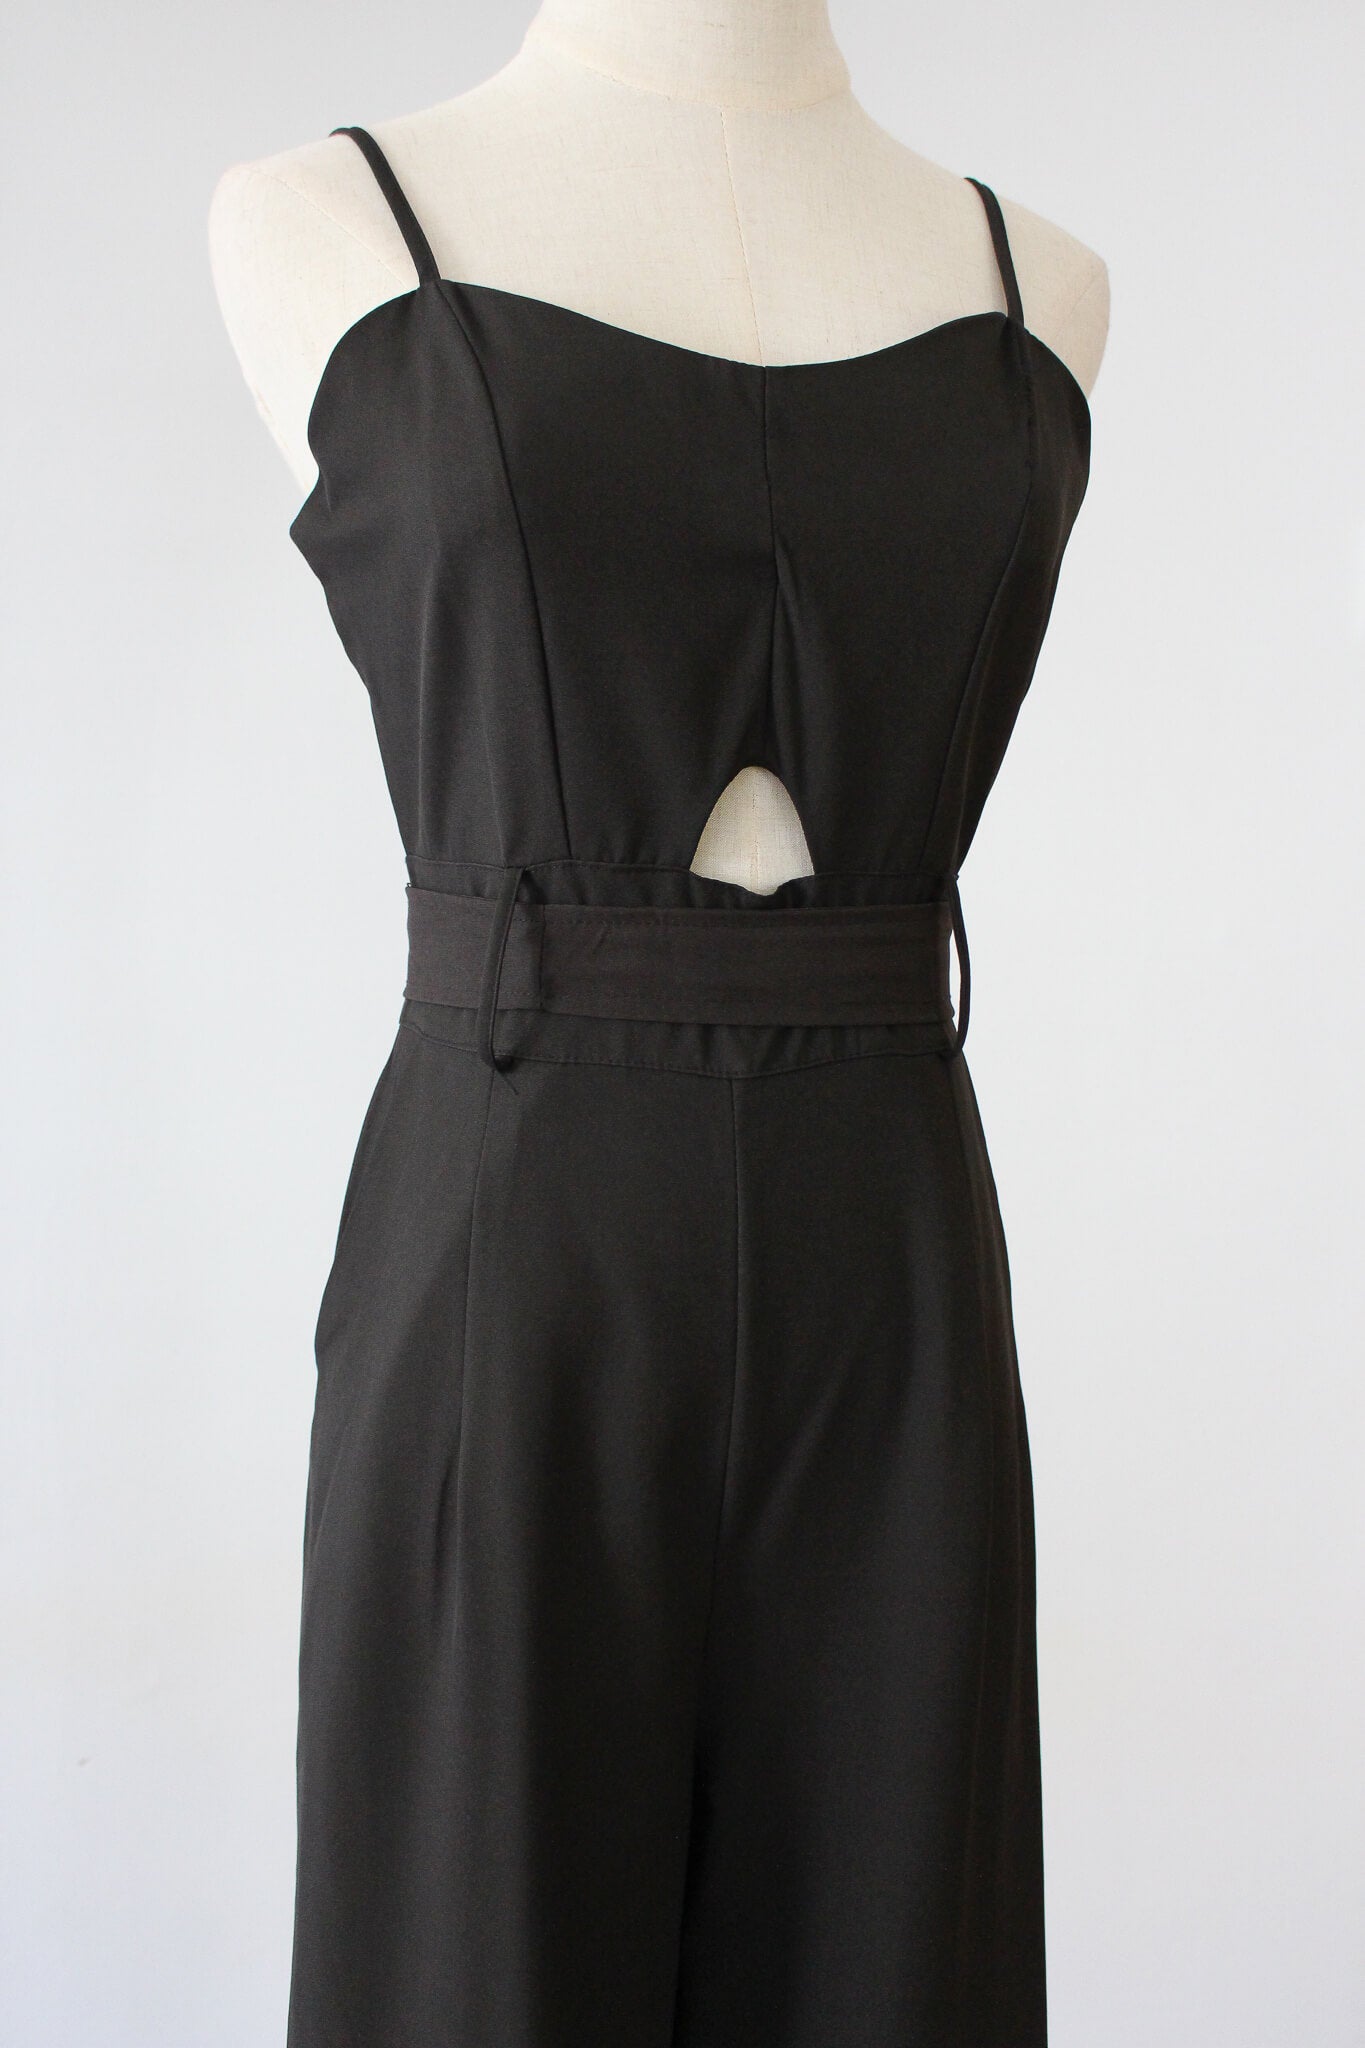 Belted Jumpsuit with small cut-out. Soft thin material perfect for summer. 